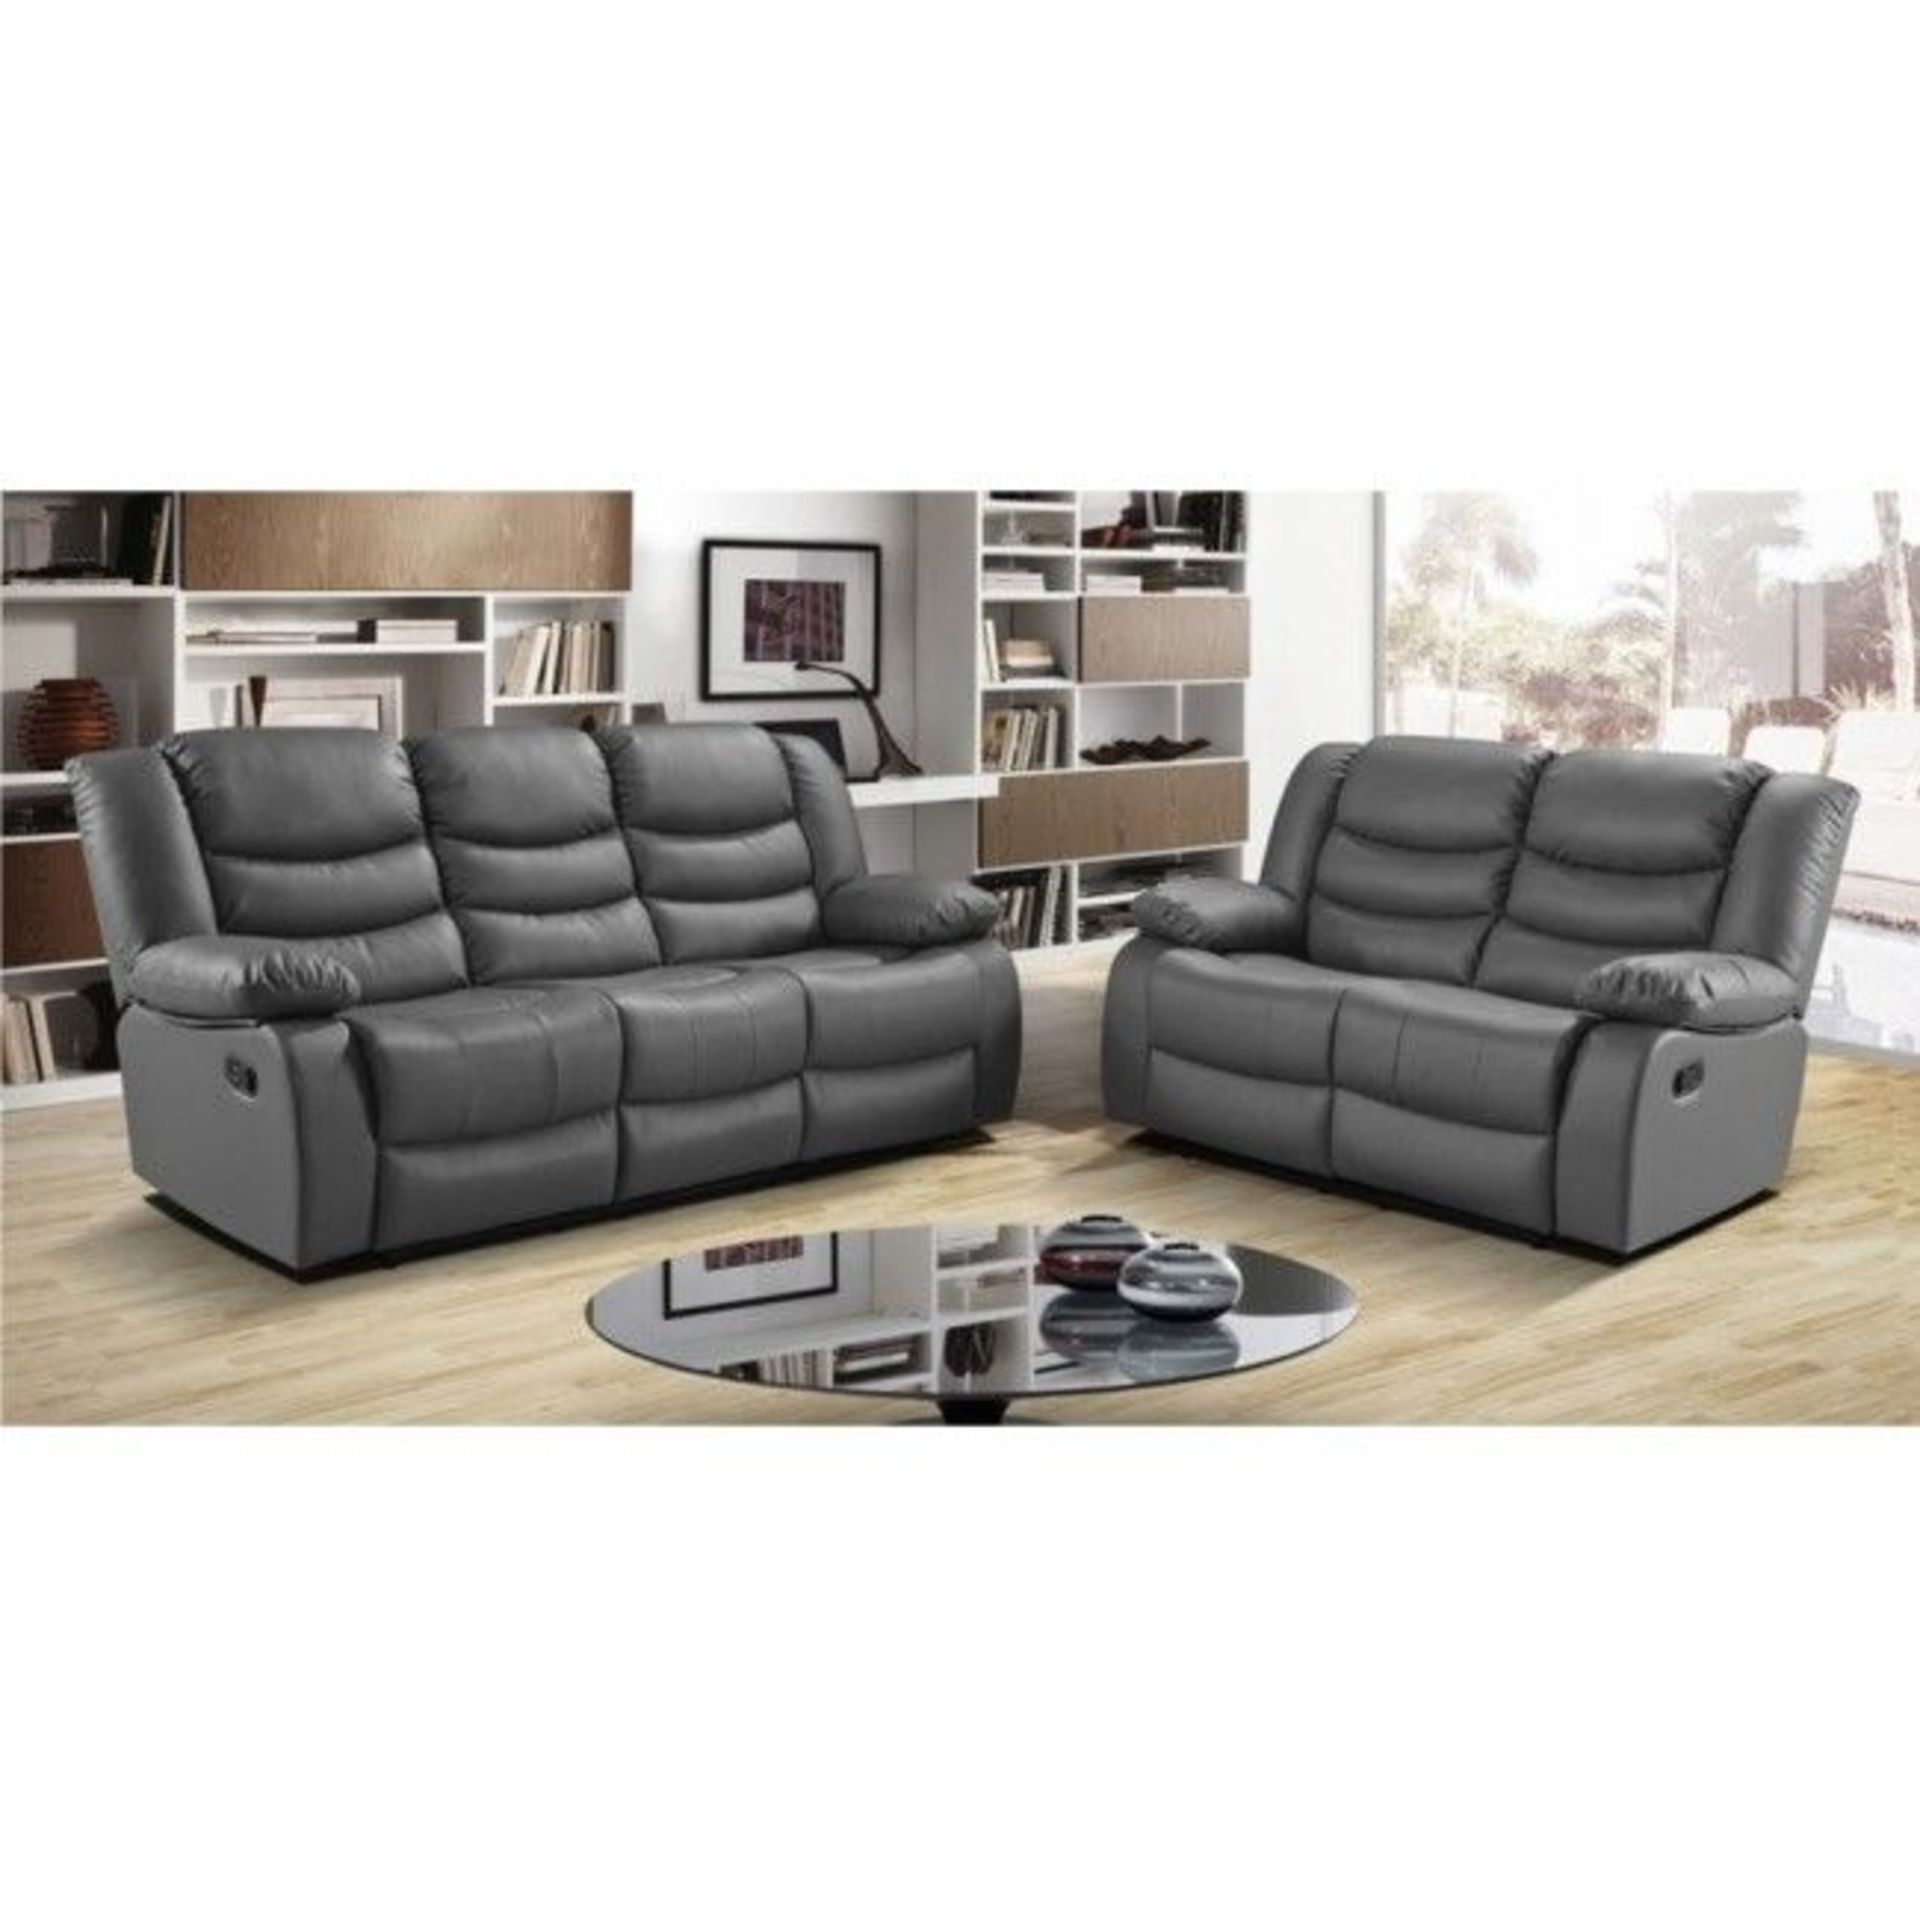 Brand New Boxed 3 Seater Plus 2 Seater Miami Grey Leather Reclining Sofas